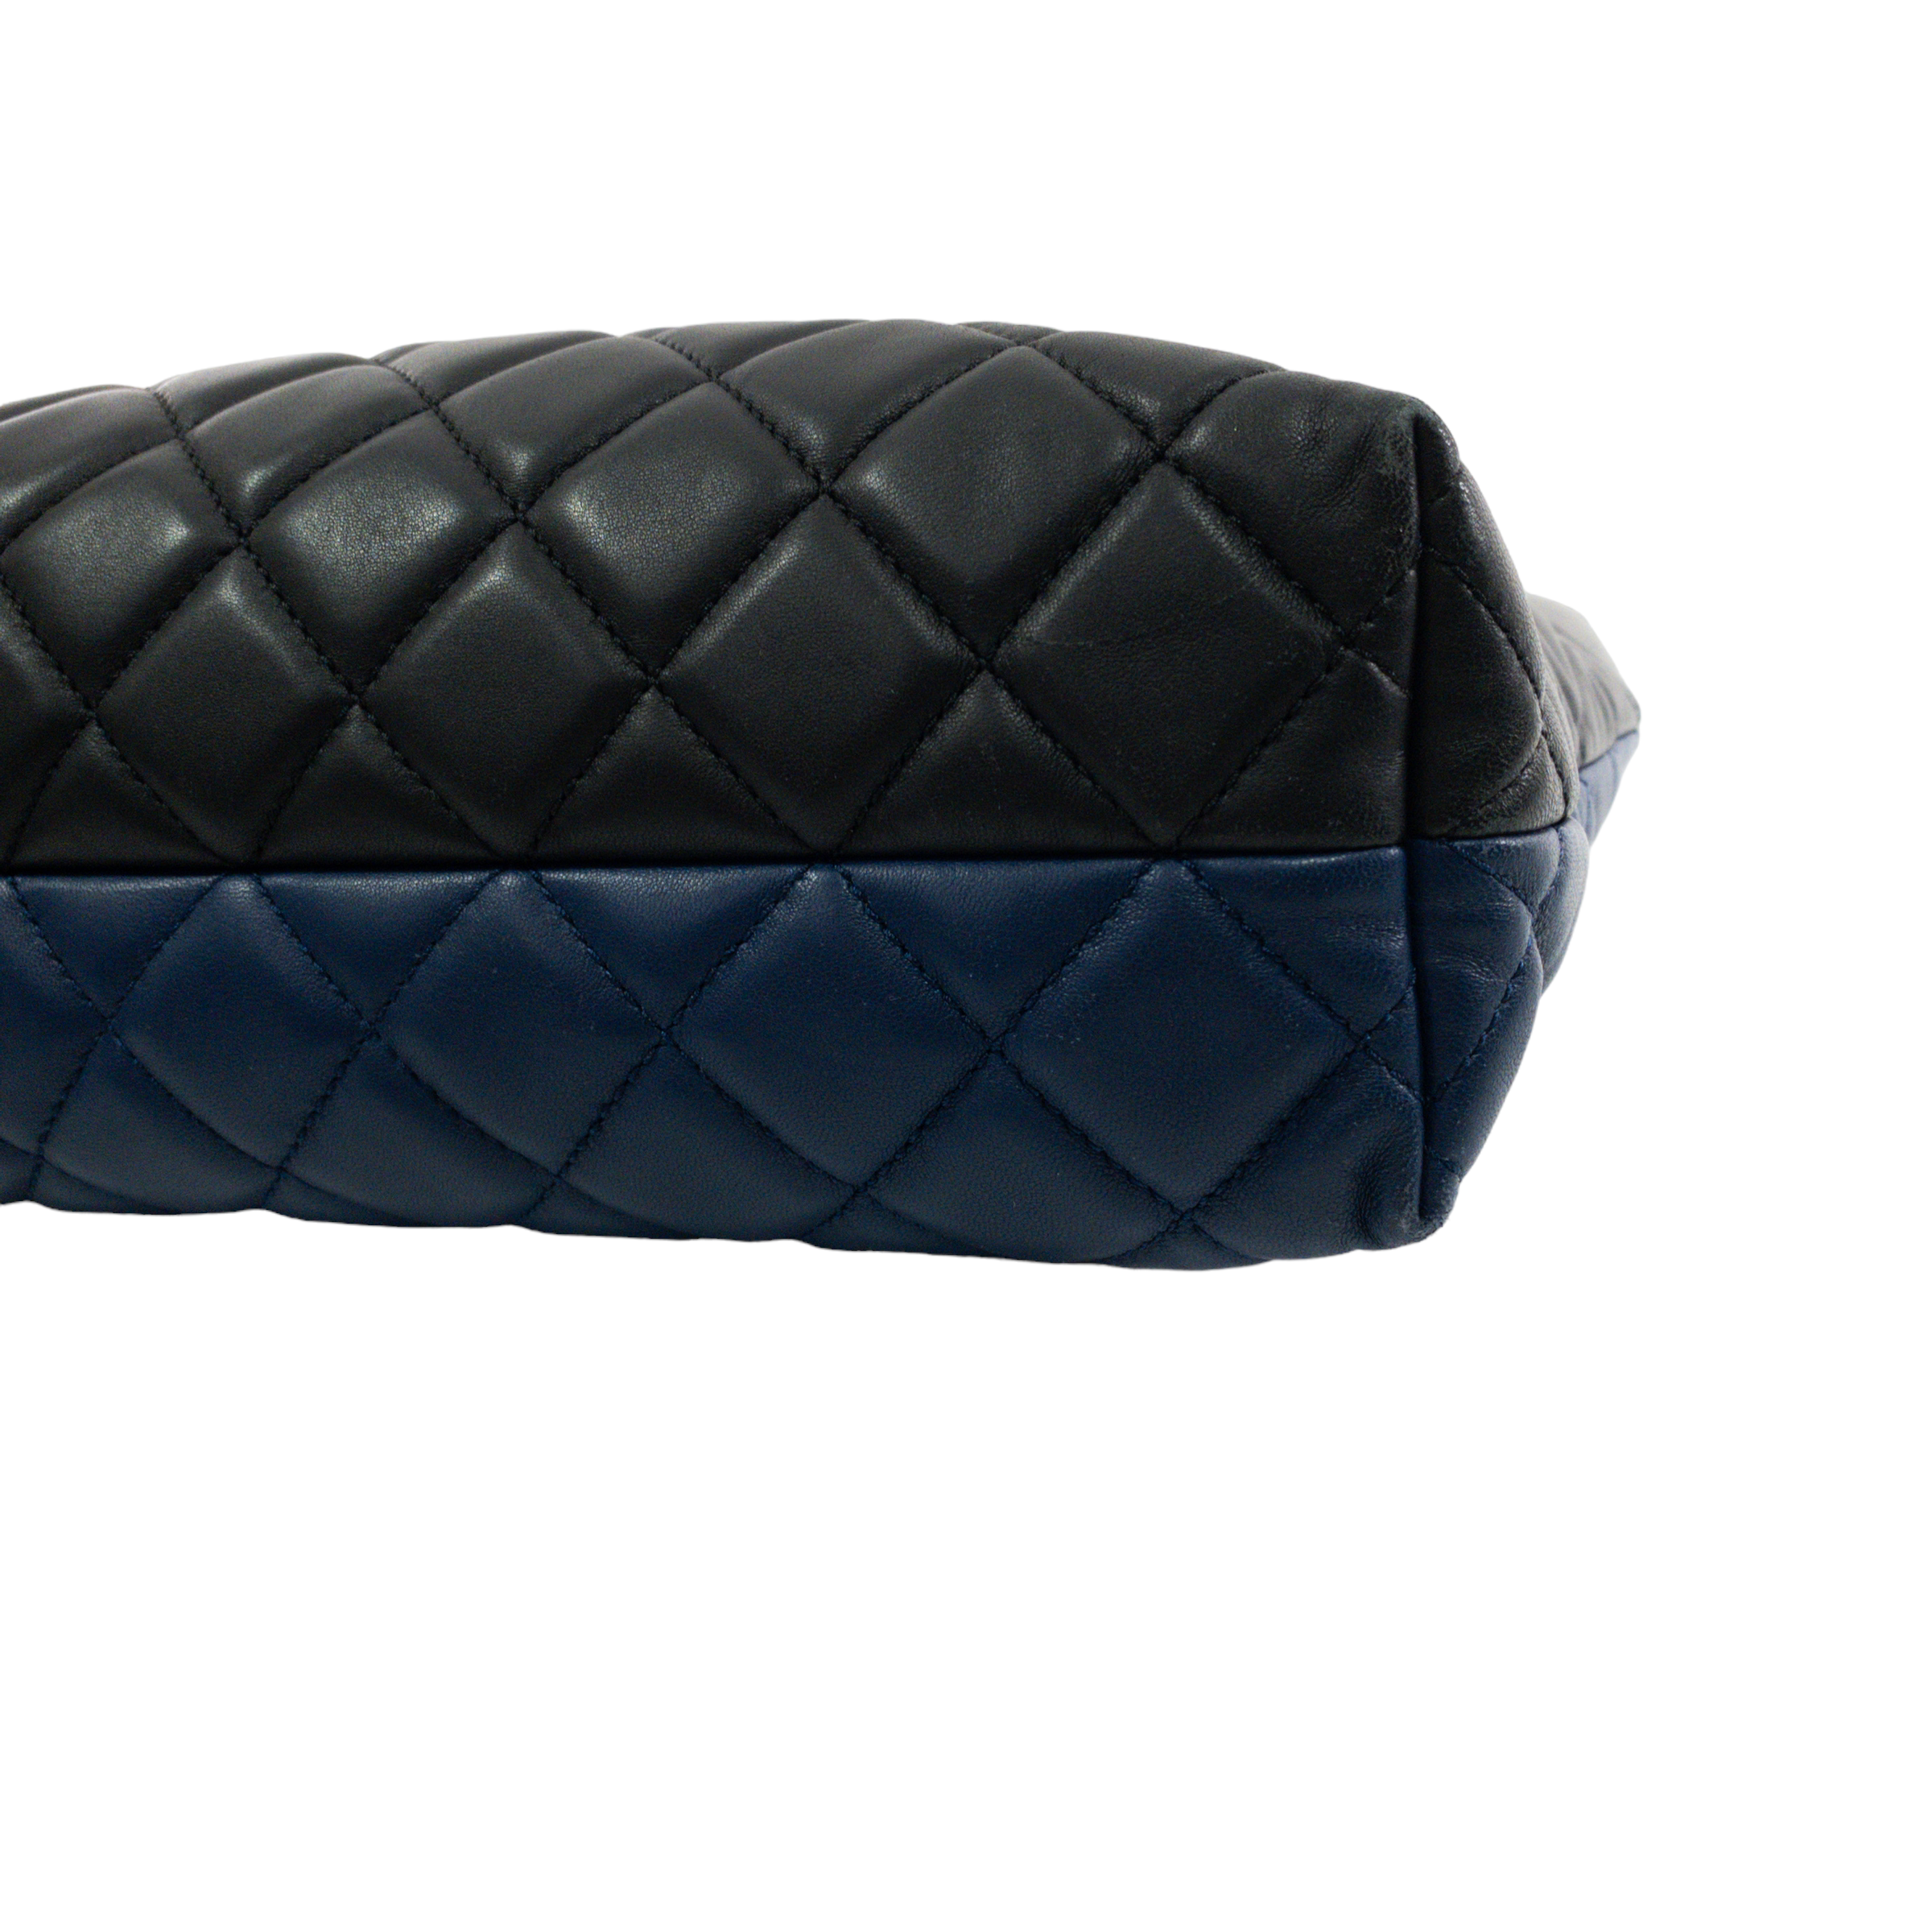 Chanel Navy/Black Quilted Lambskin Shopper Tote RHW